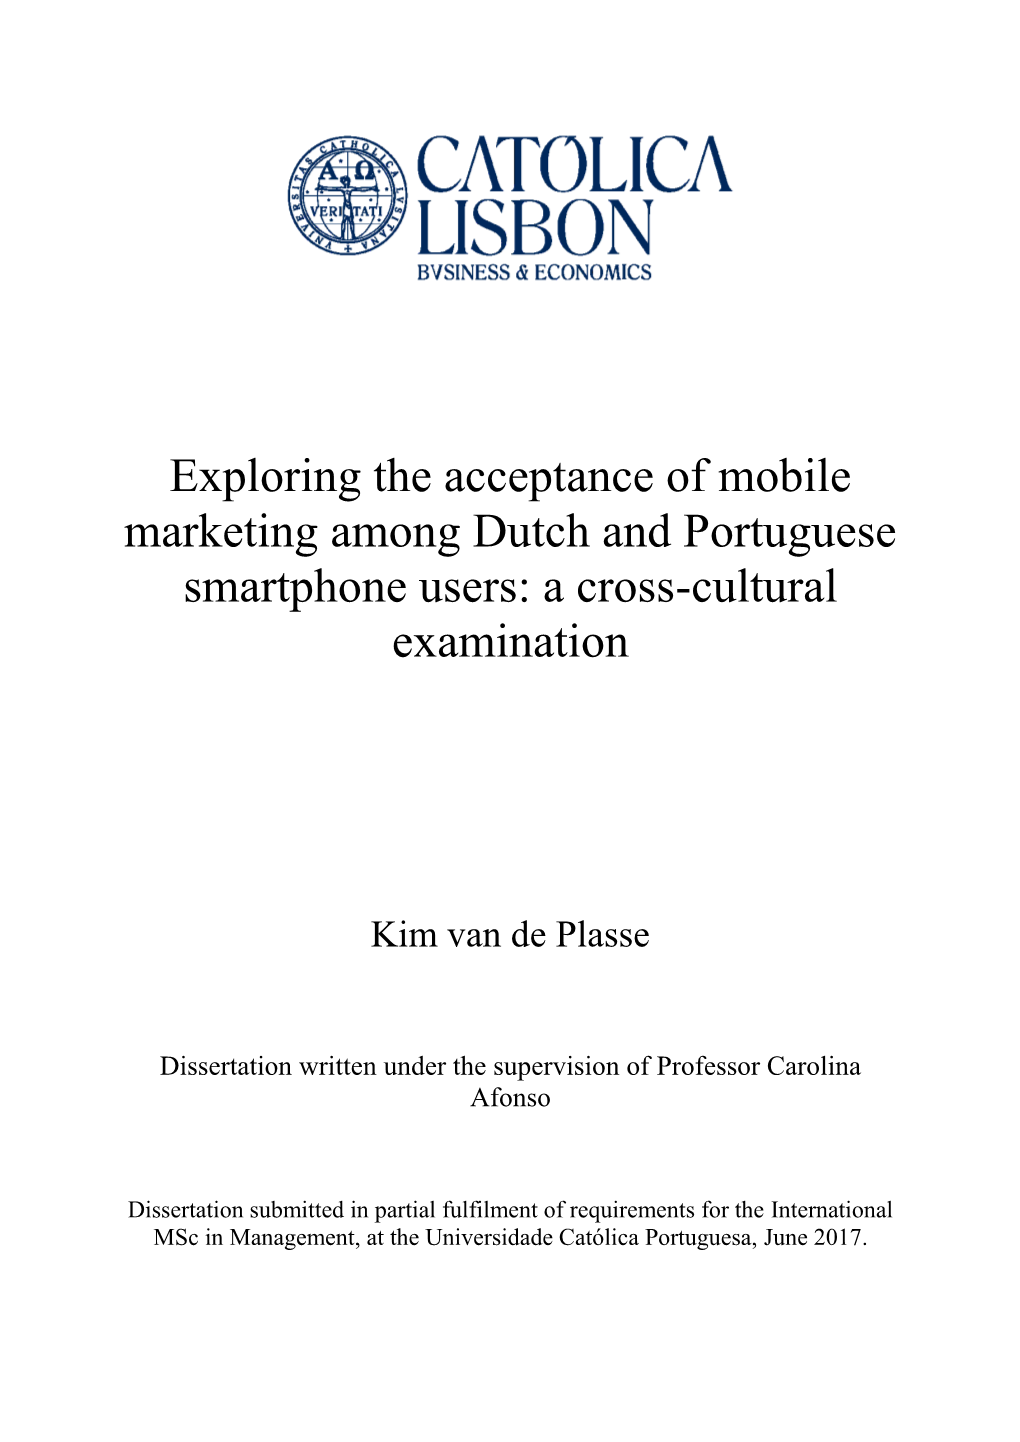 Exploring the Acceptance of Mobile Marketing Among Dutch and Portuguese Smartphone Users: a Cross-Cultural Examination